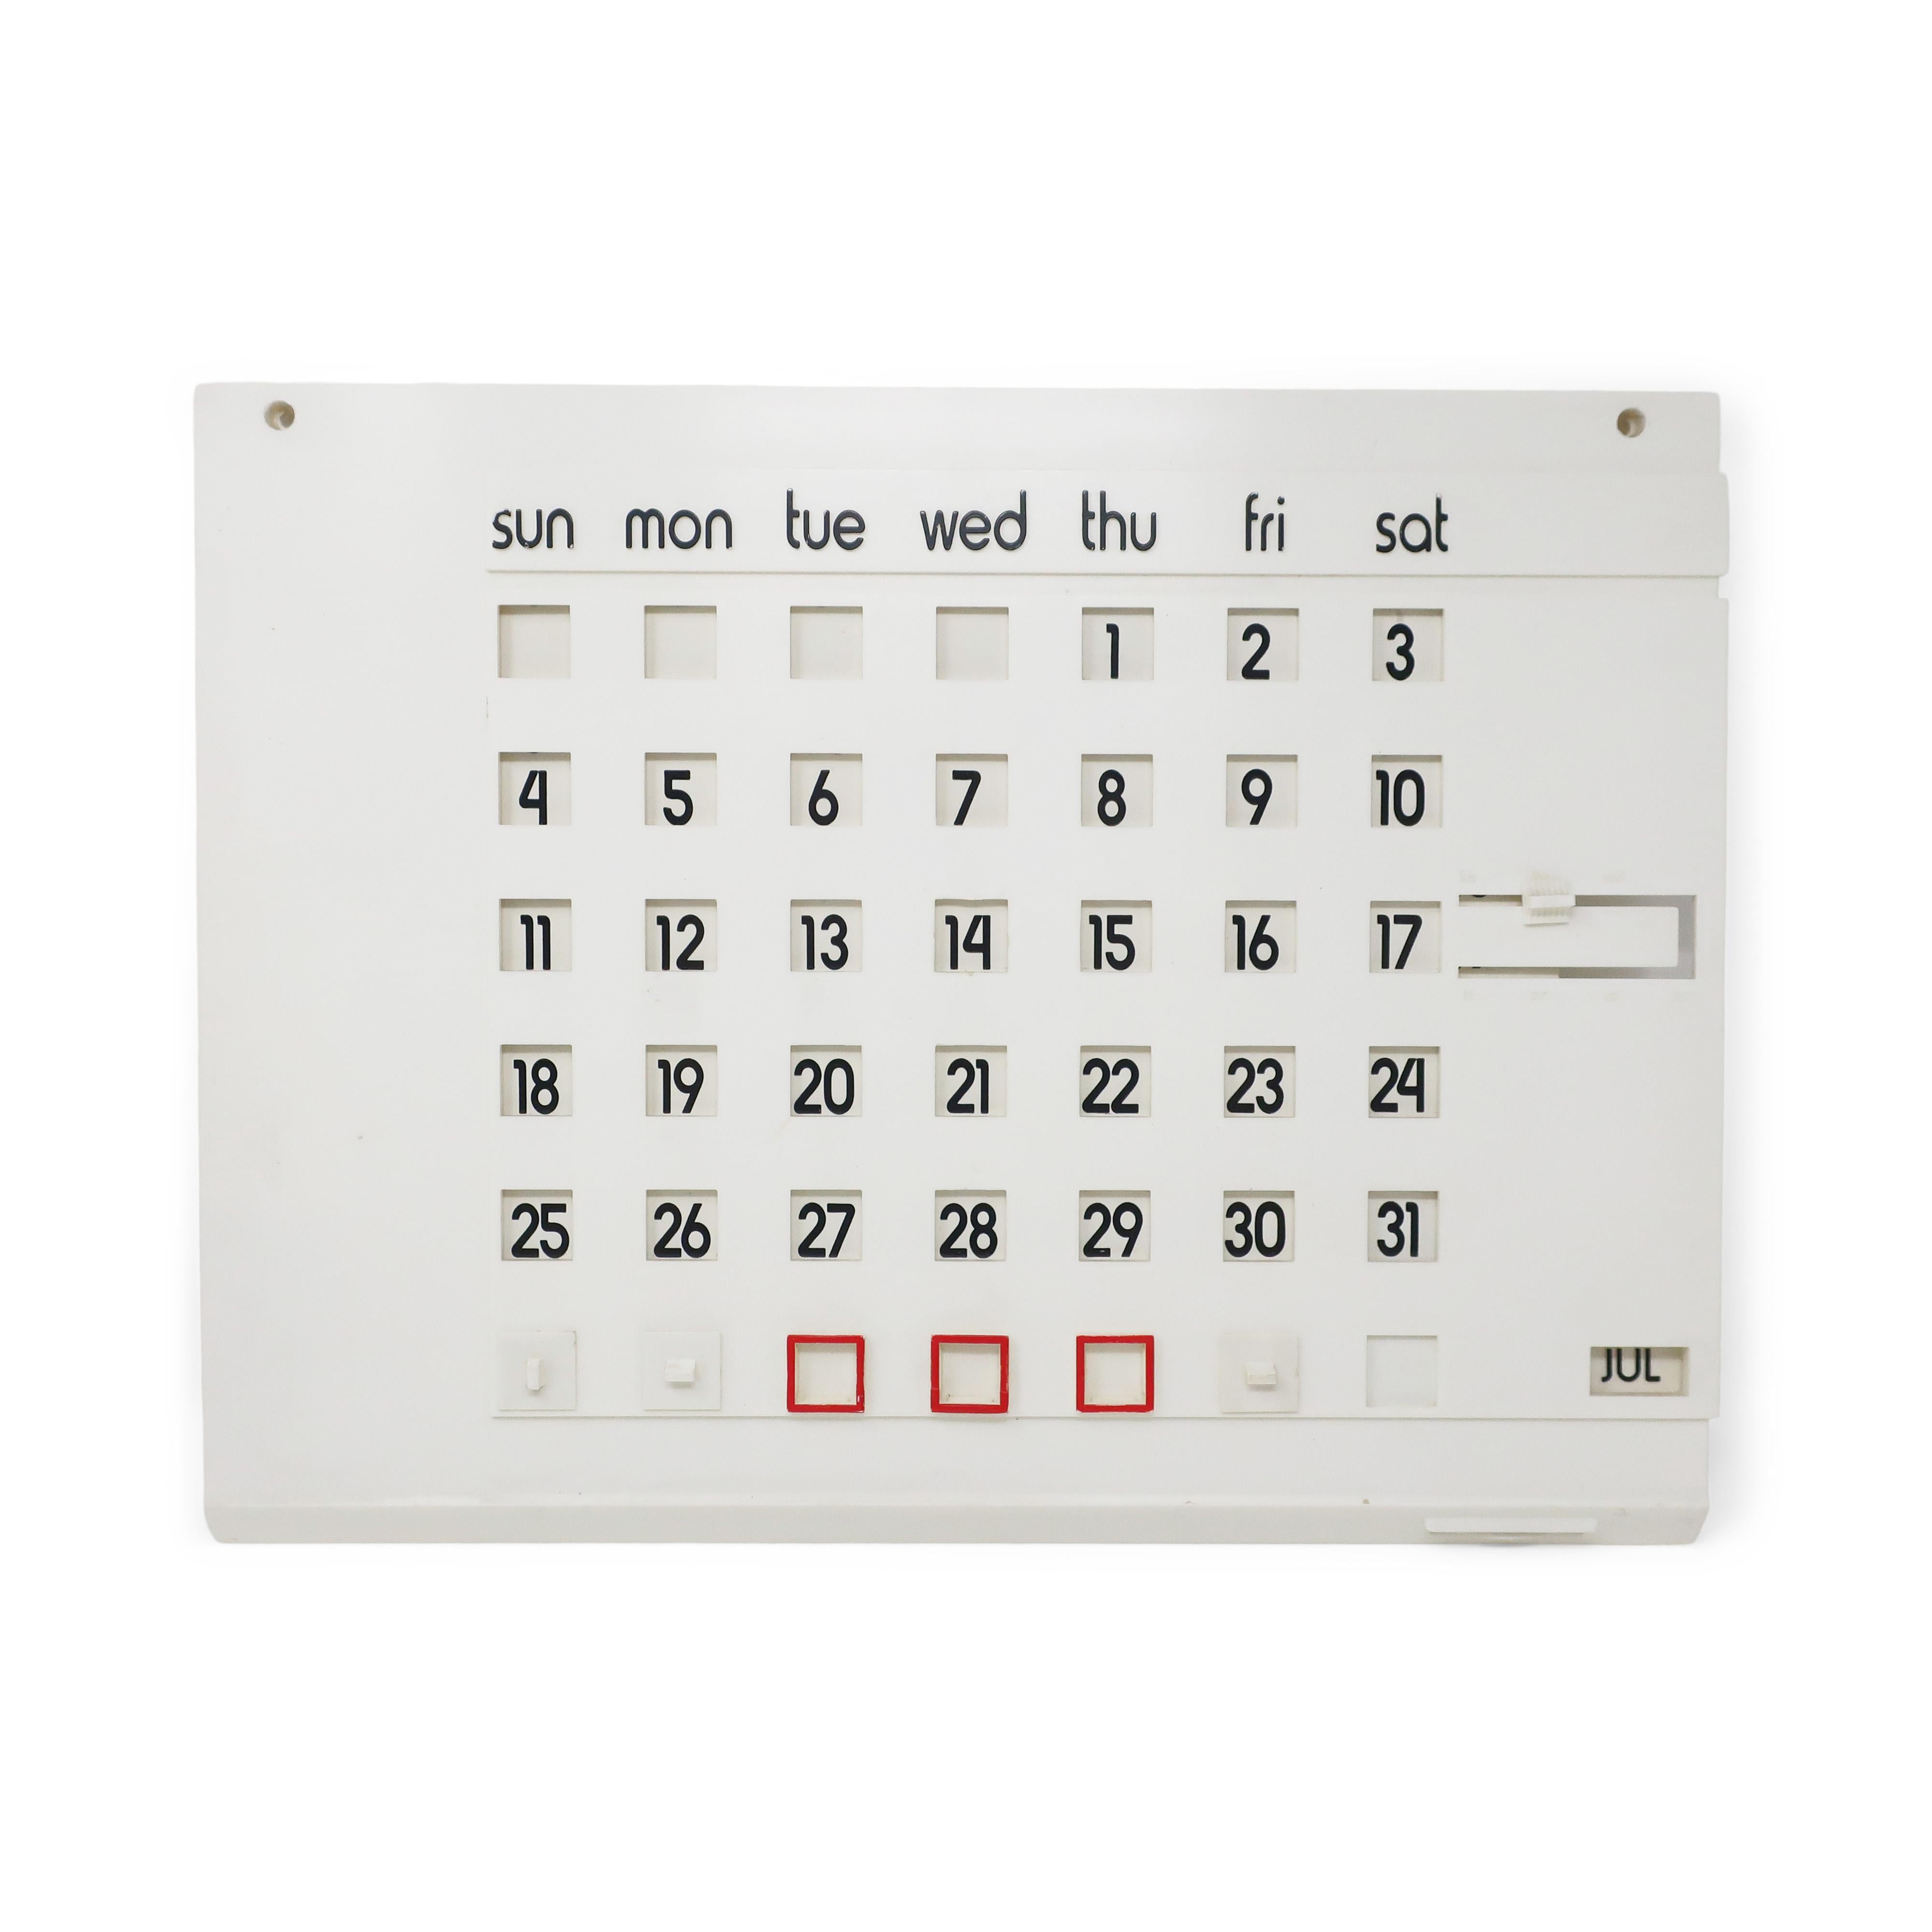 A very cool Mid-Century Modern (possibly Scandinavian) white plastic perpetual calendar. Allows for setting the month and the first day of each each month so the dates line up with the correct day of the week, as well as including red framed pieces